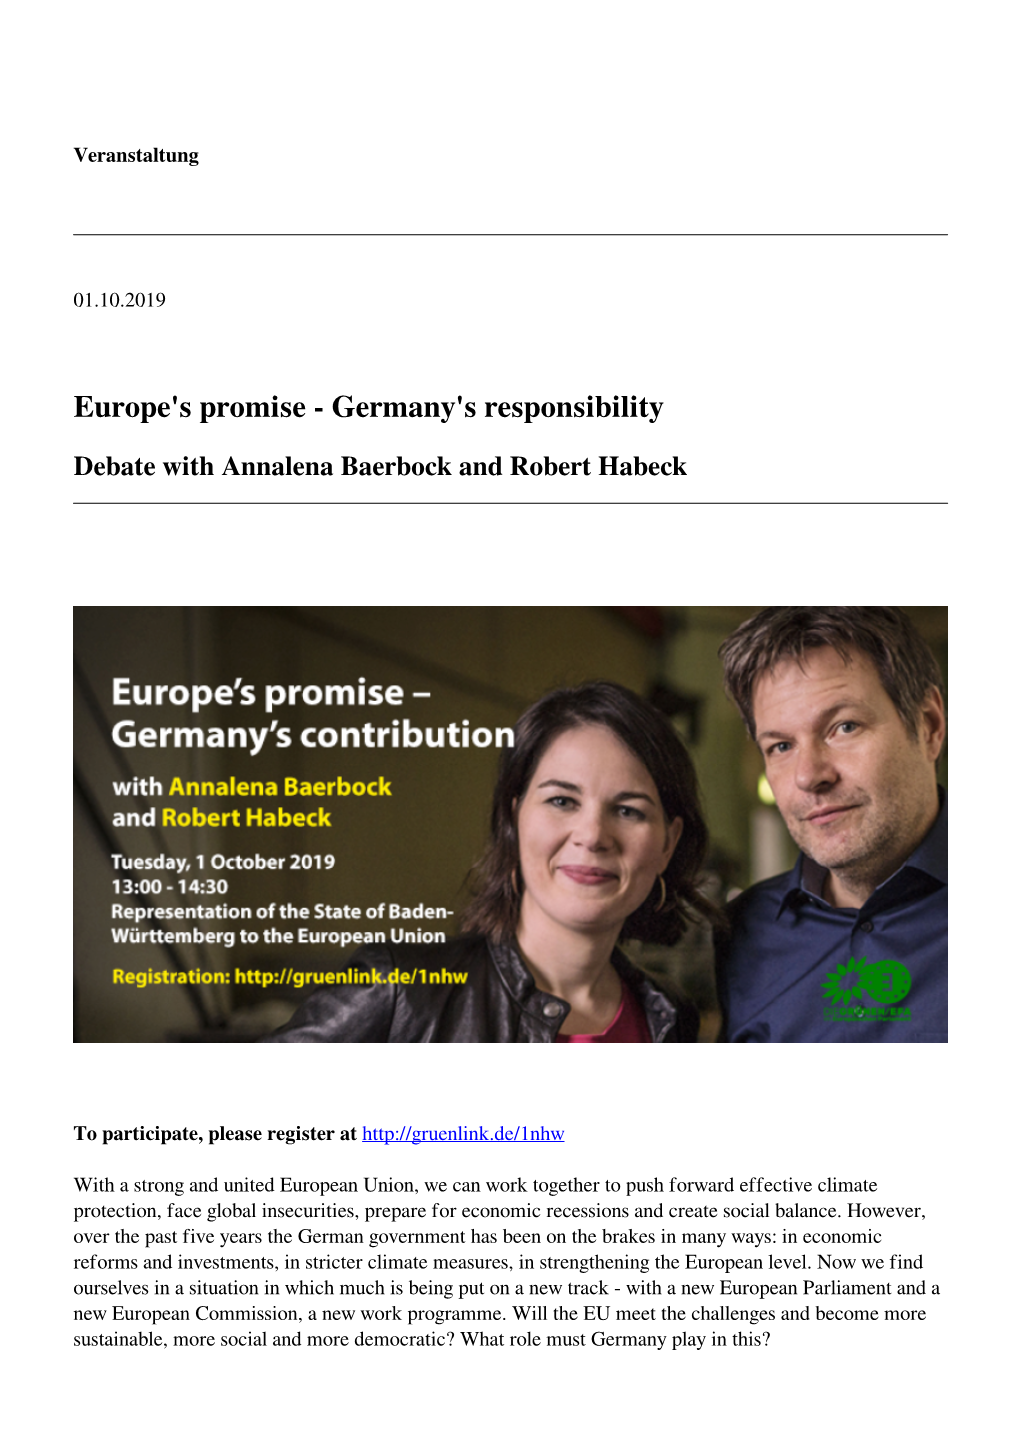 Europe's Promise - Germany's Responsibility